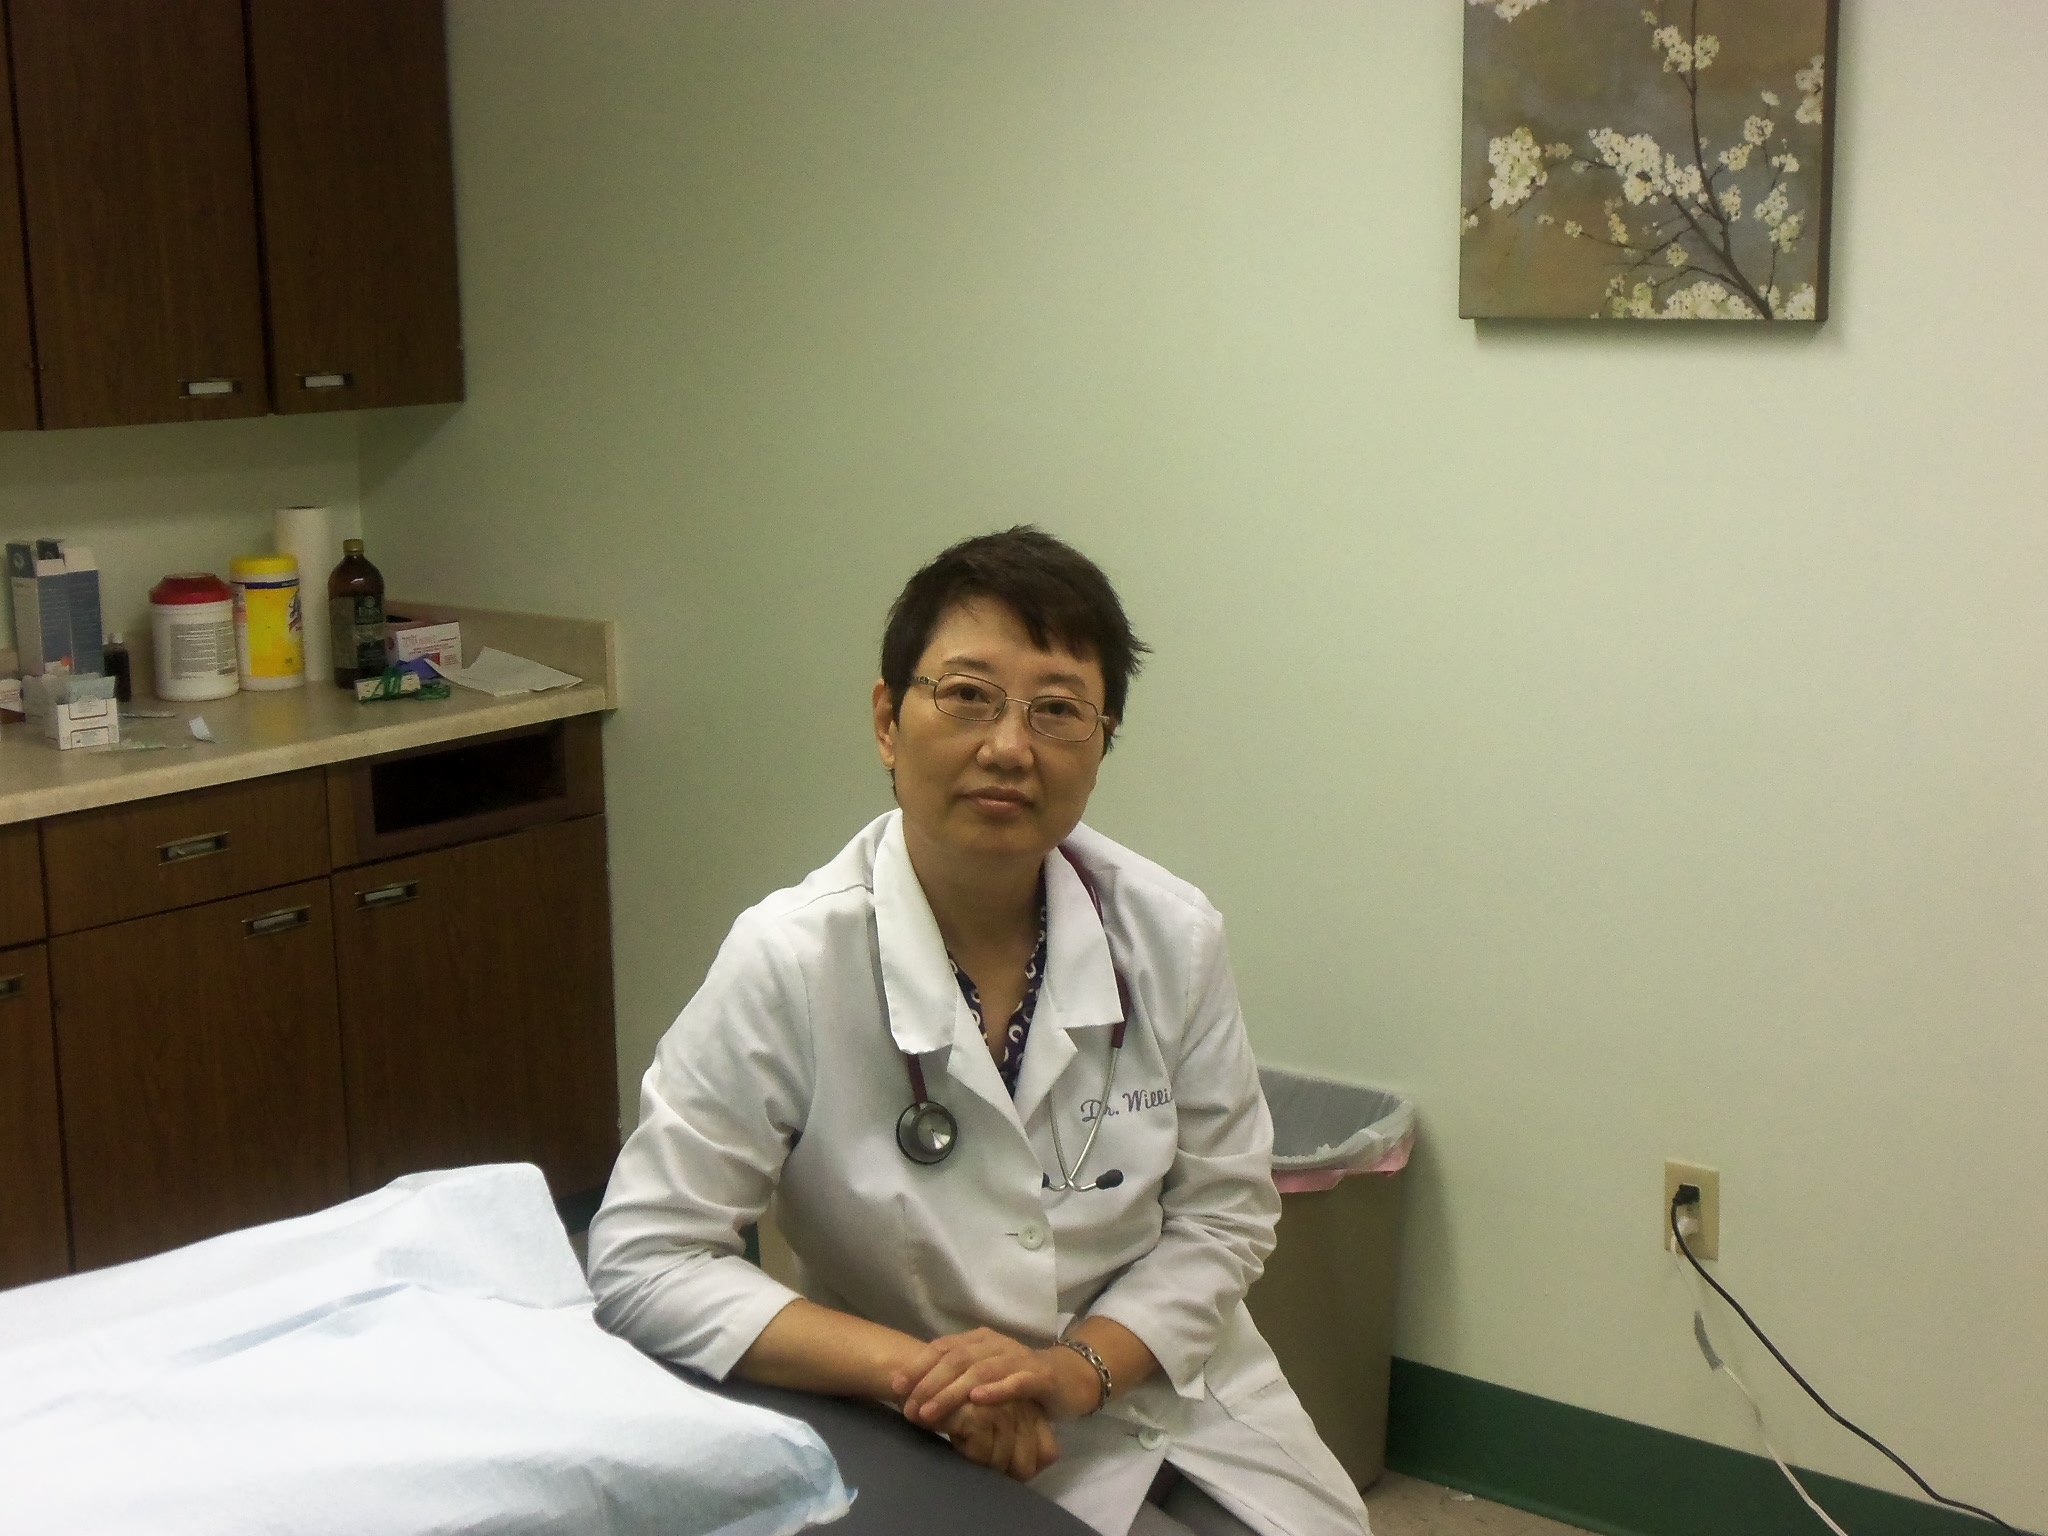 Dr. Jessica Ying Williams, MD